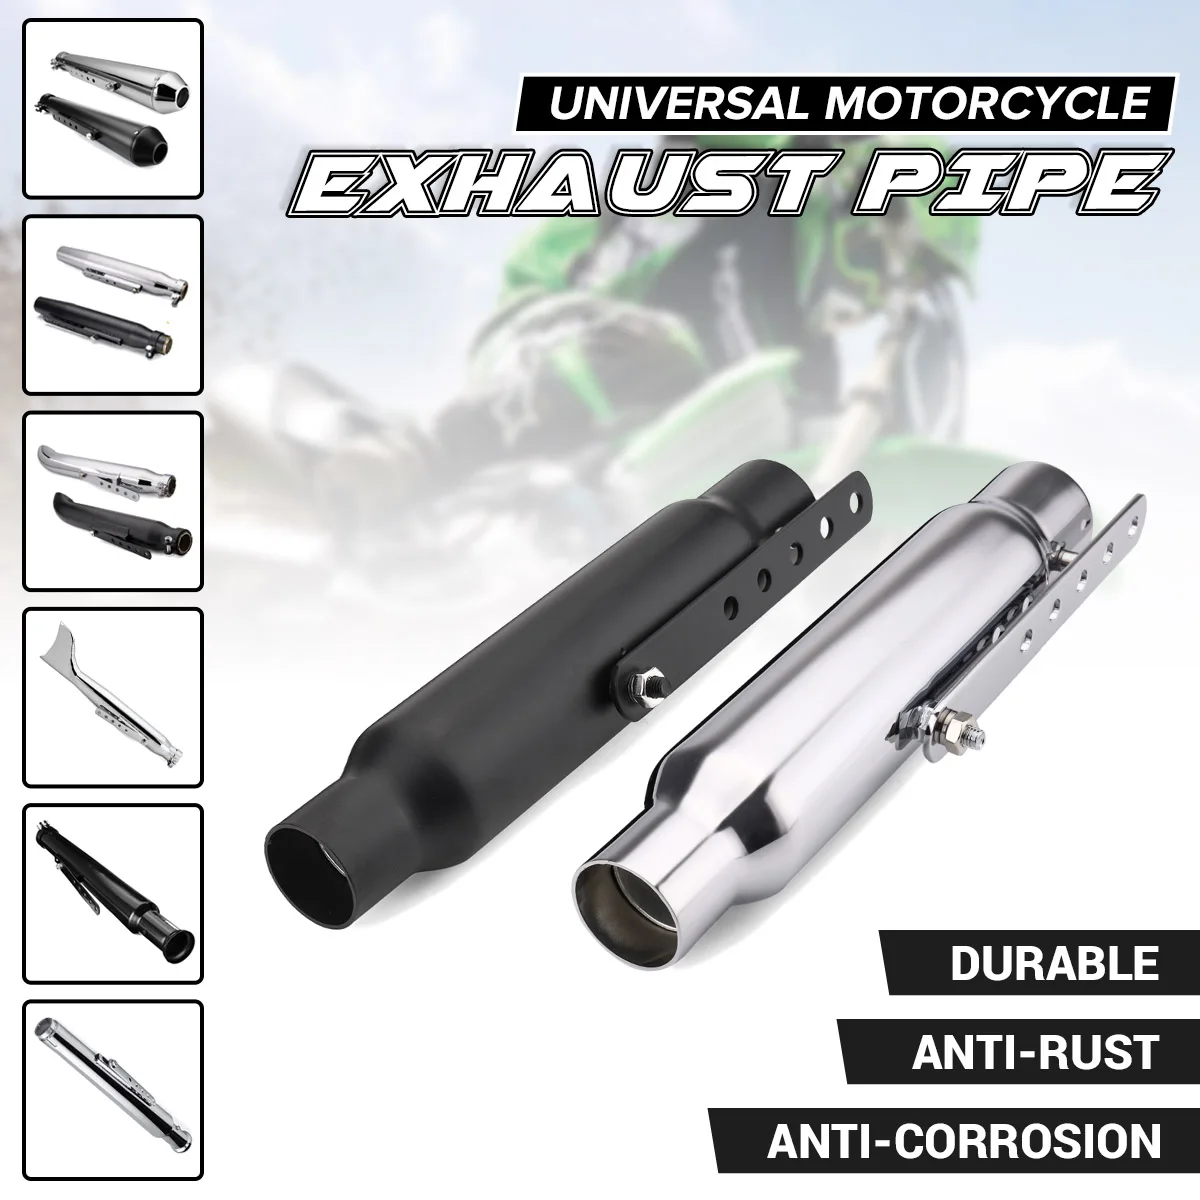 Retro Design Motorcycle Exhaust Pipe for Maintenance for Motorcycle Motorcycle Exhaust Silencer